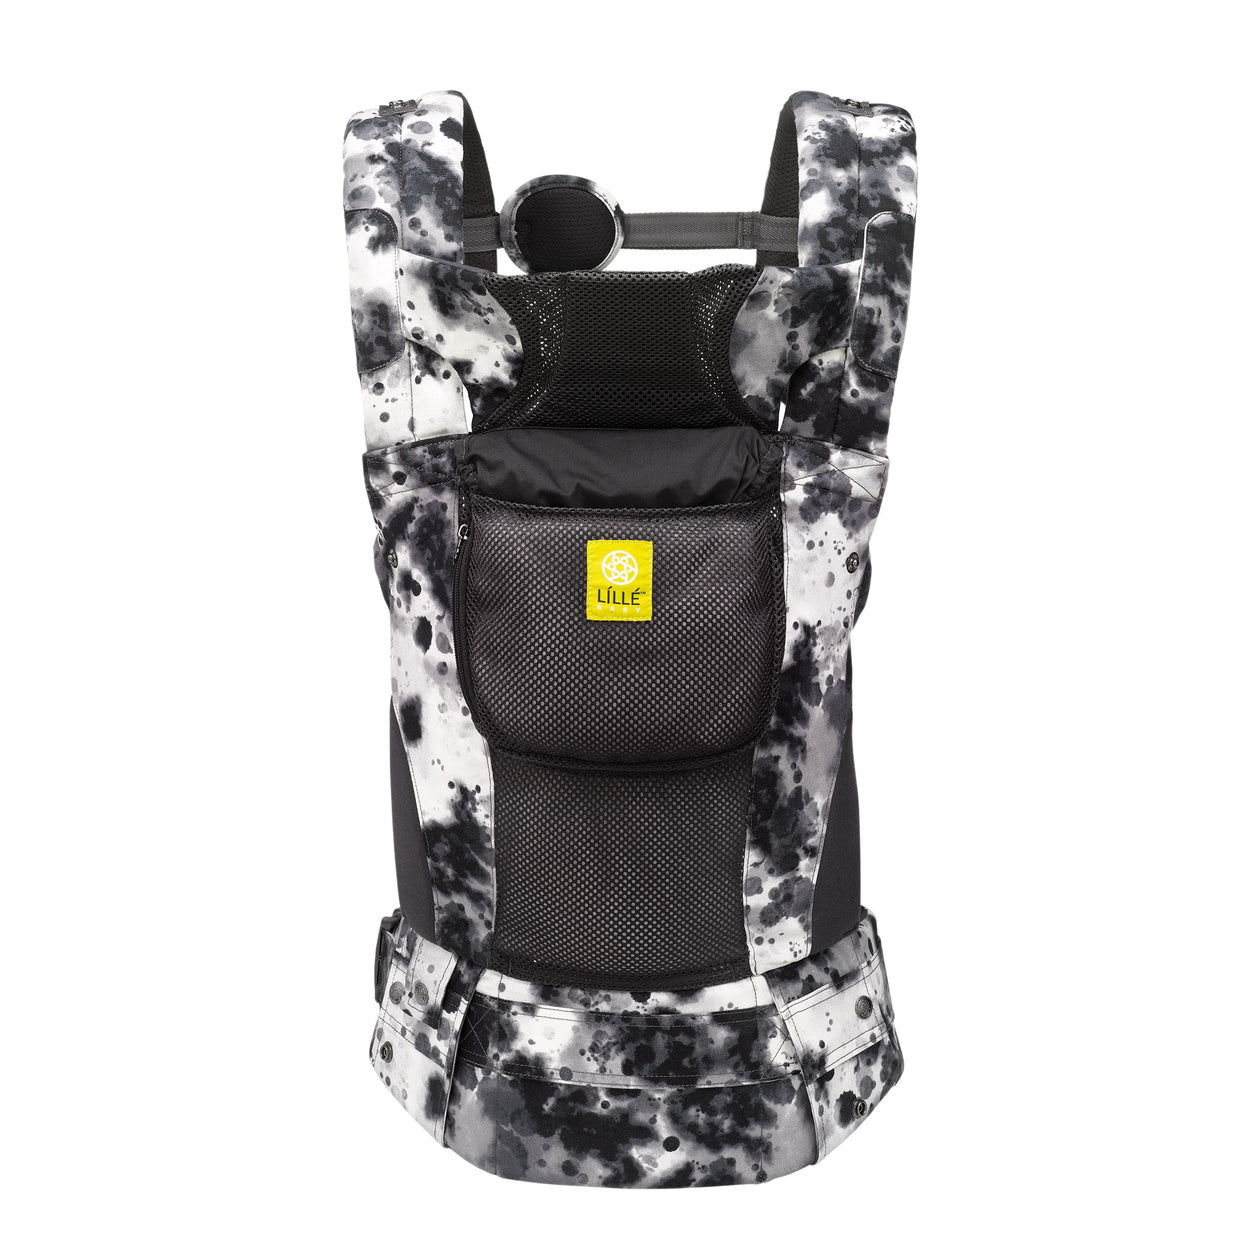 Baby Carrier Newborn To Toddler COMPLETE Airflow DLX in Galaxy Space Dye